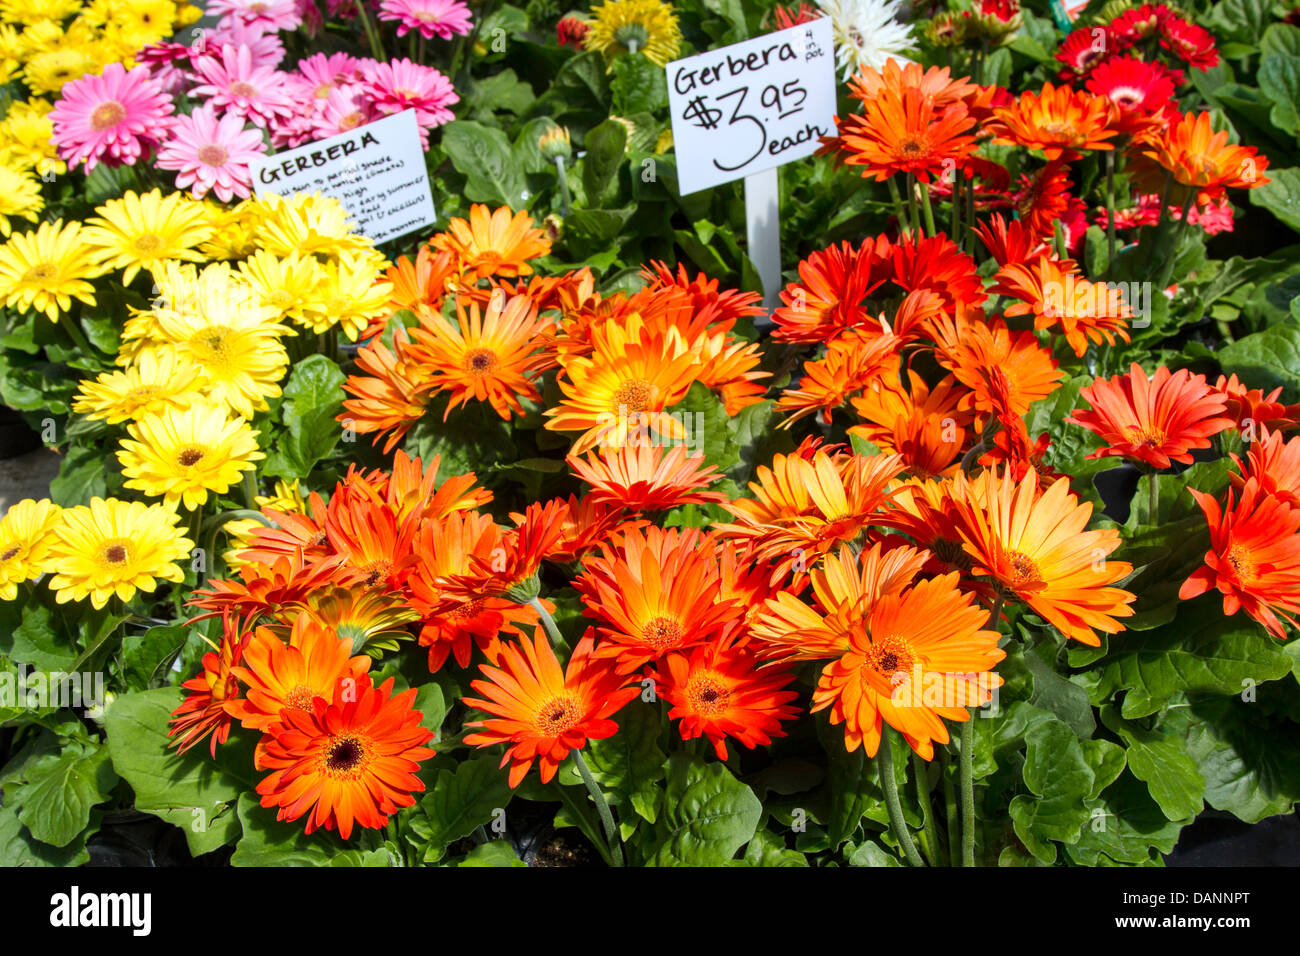 Gerbera daisies for sale at farmers market Stock Photo